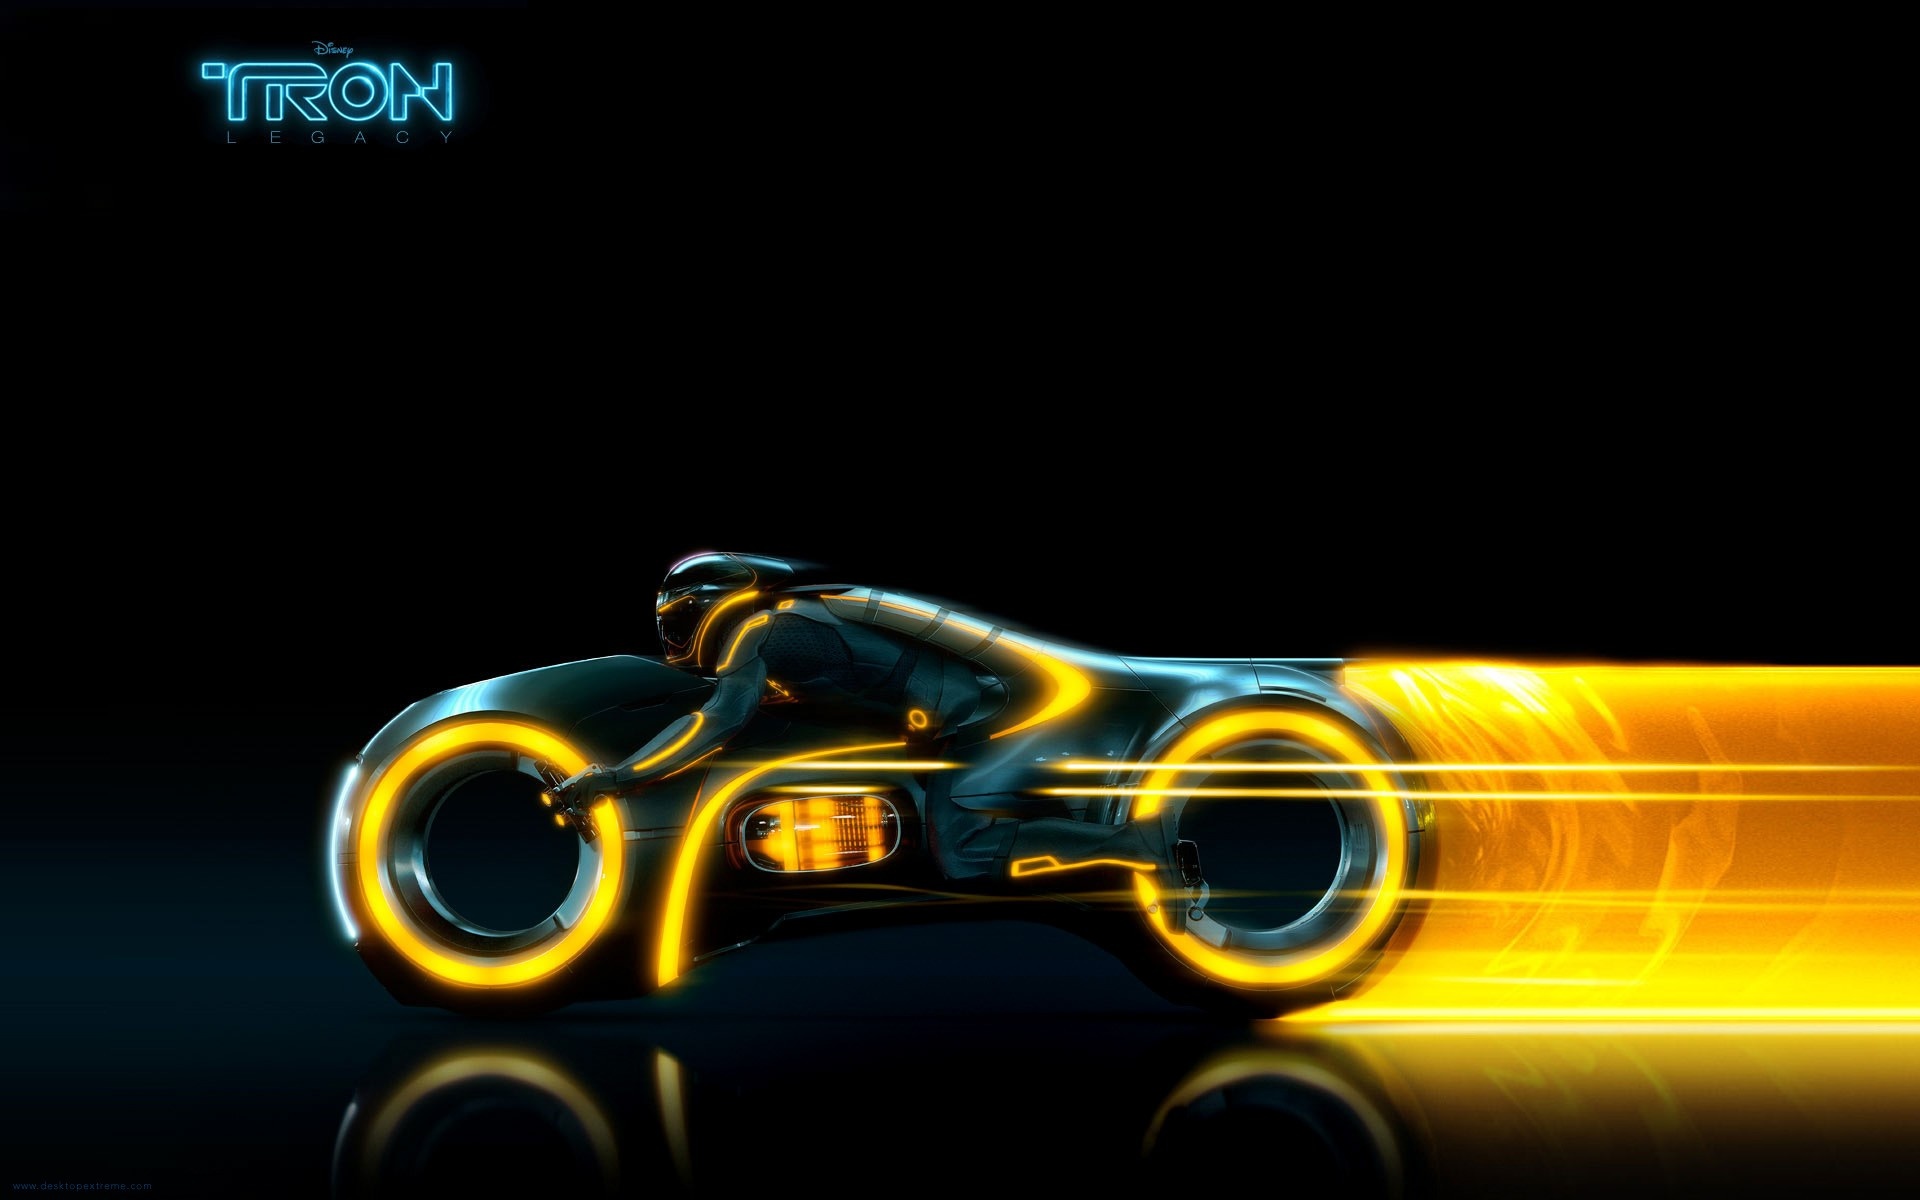 Tron (Movie): The film was produced by Steven Lisberger, who directed the original film. 1920x1200 HD Wallpaper.